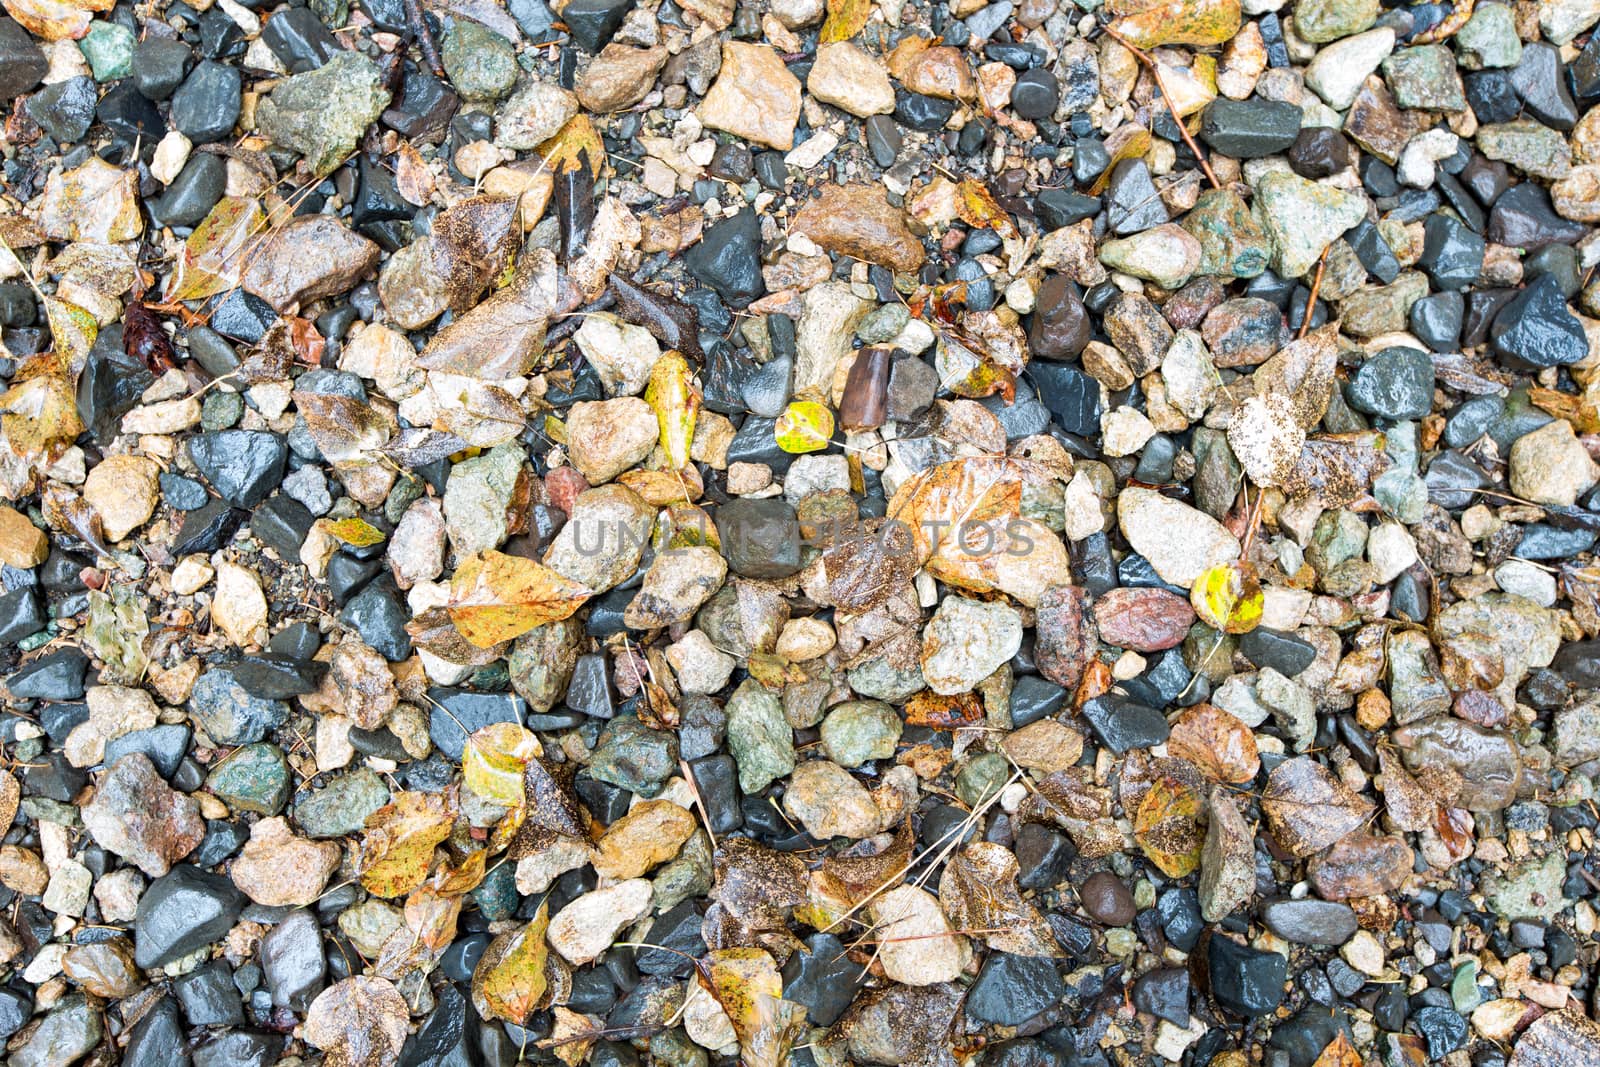 Plenty of Wet Small Rocks and Fallen Leaves for Wallpaper Backgrounds, Captured in High Angle View.